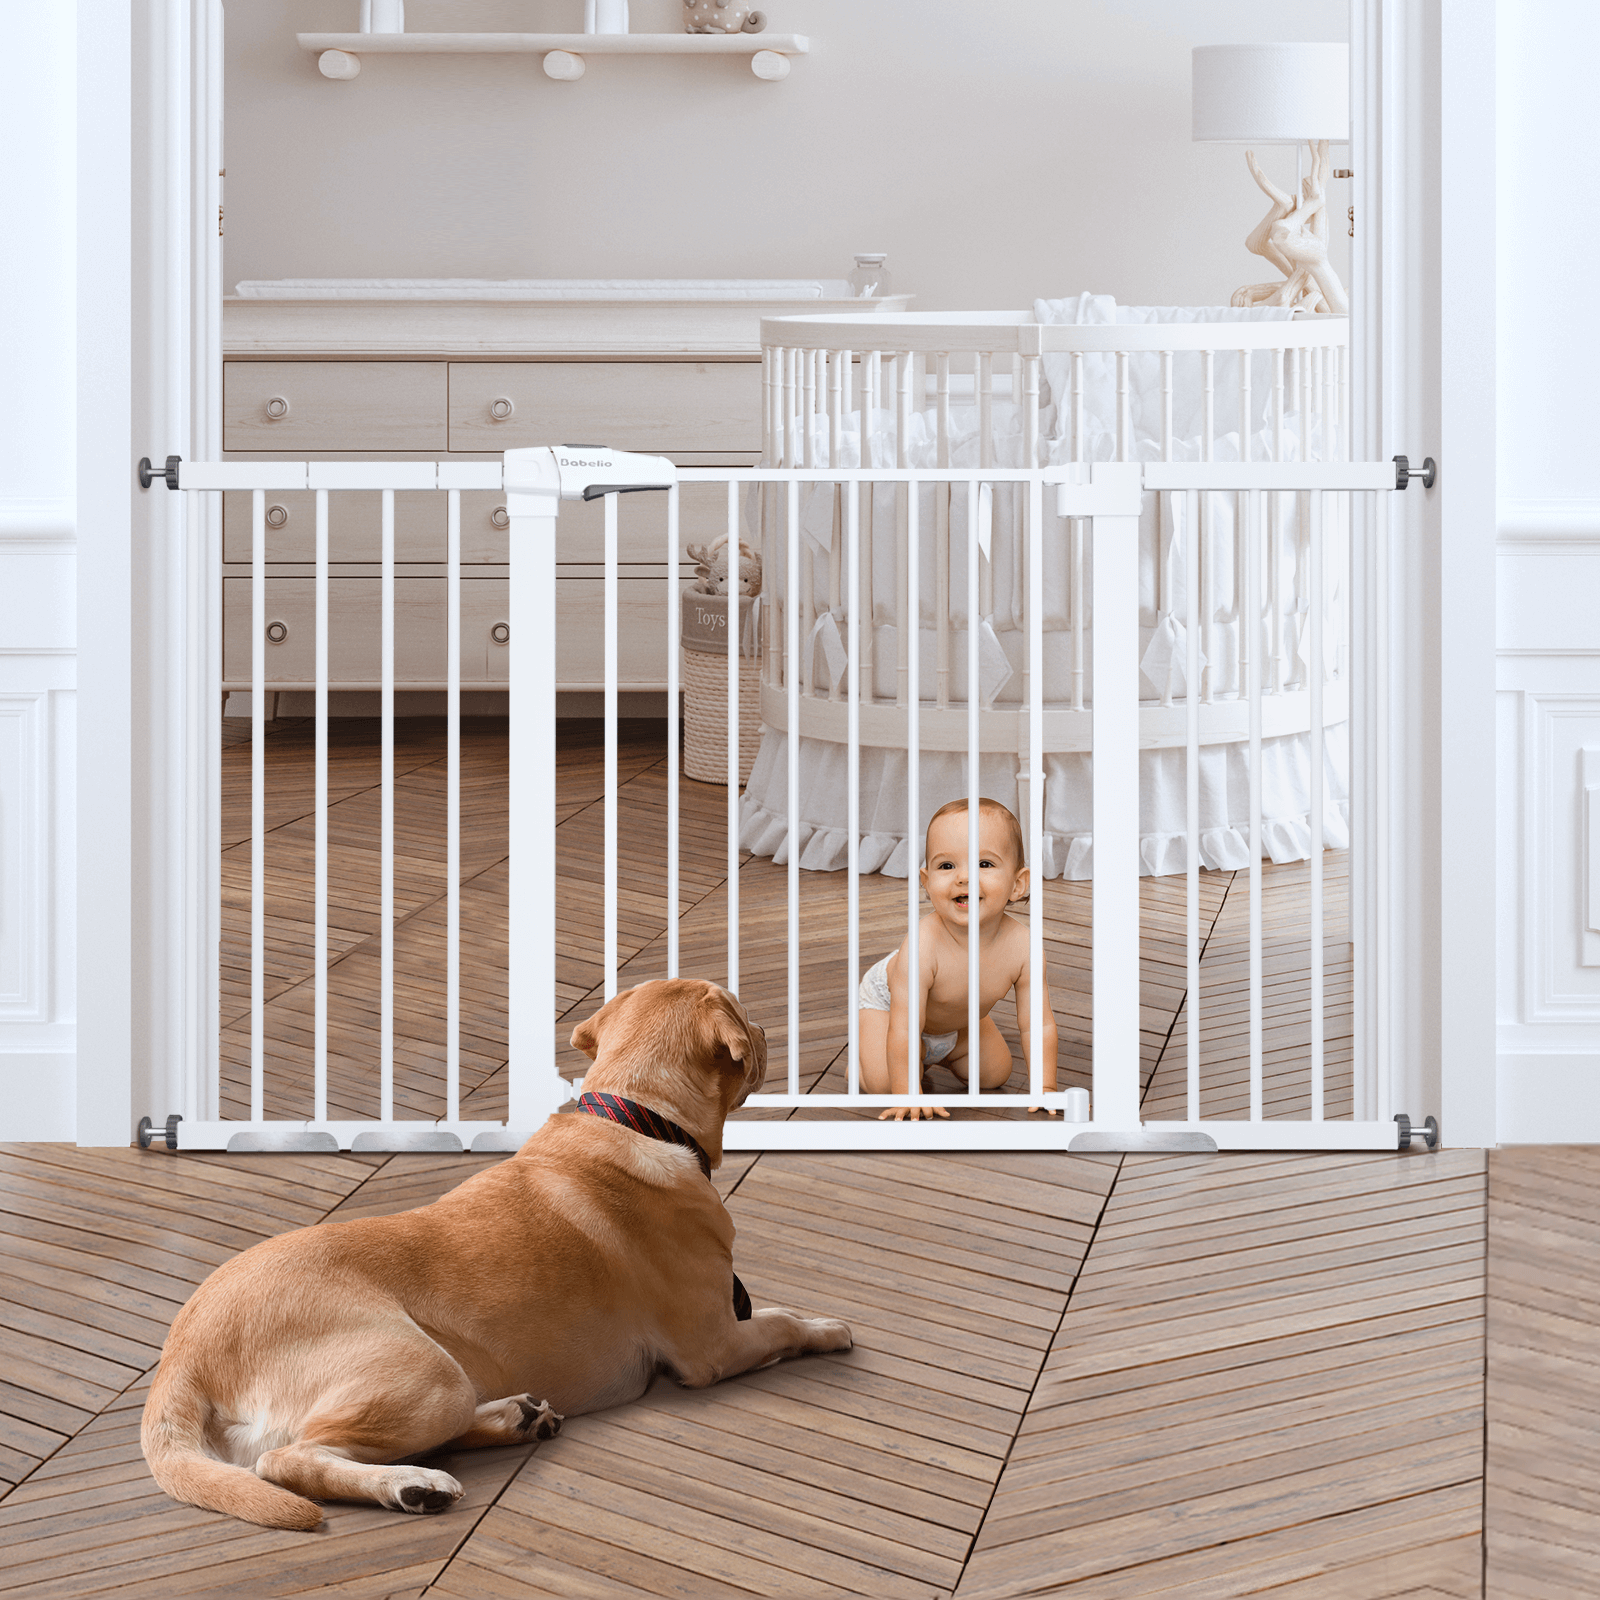 Babelio 29-55" Wide All-Steel Baby Gate – Easy Walk-Through, No-Drill Setup, Auto-Close, for Children and Pets